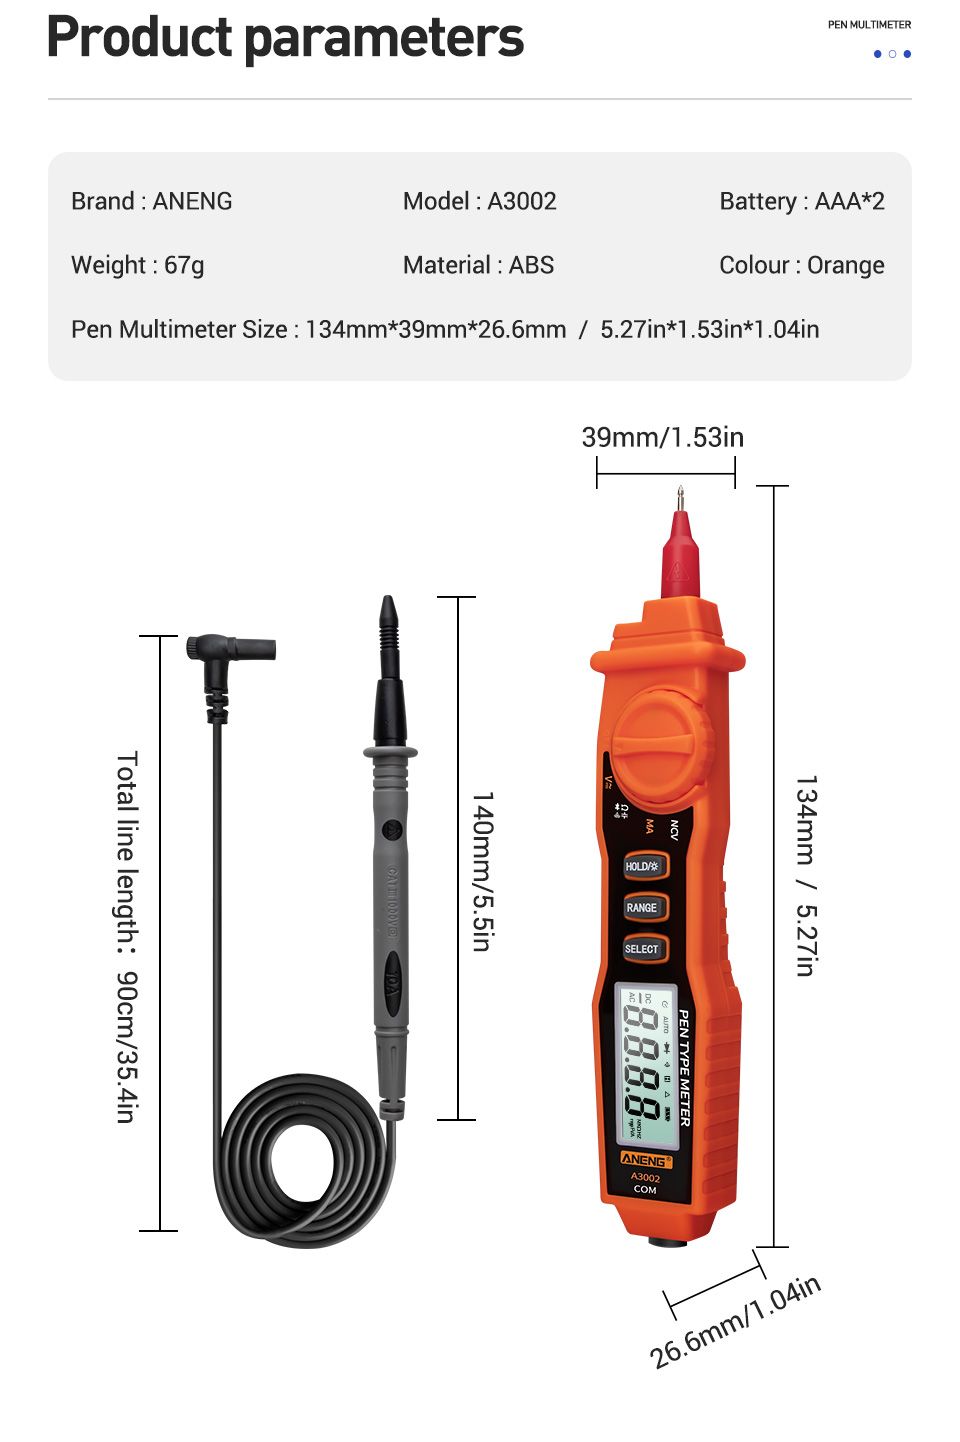 ANENG-A3002-Digital-Multimeter-Pen-Type-4000-Counts-with-Non-Contact-ACDC-Voltage-Resistance-Diode-C-1685310